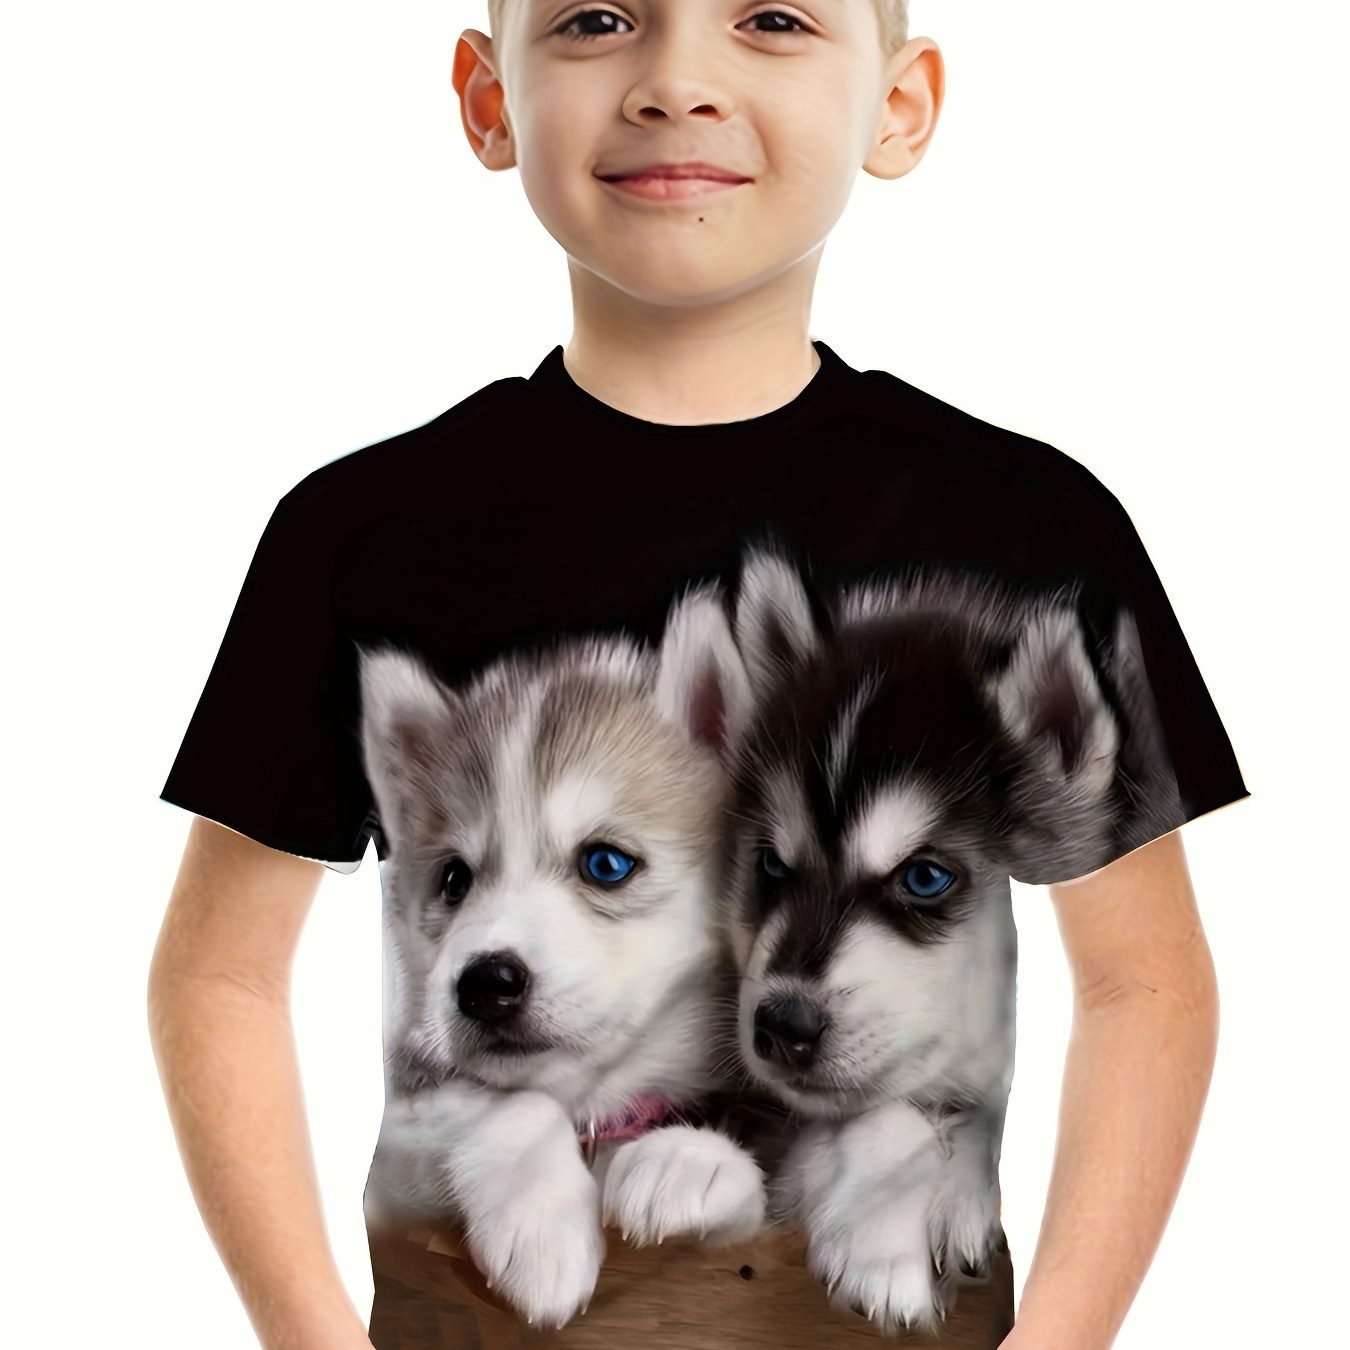 

Puppy Digital Graphic Print Boys Crew Neck T-shirt Lighweight & Comfortable Fit Short Sleeve Tee Top For Youth Kid